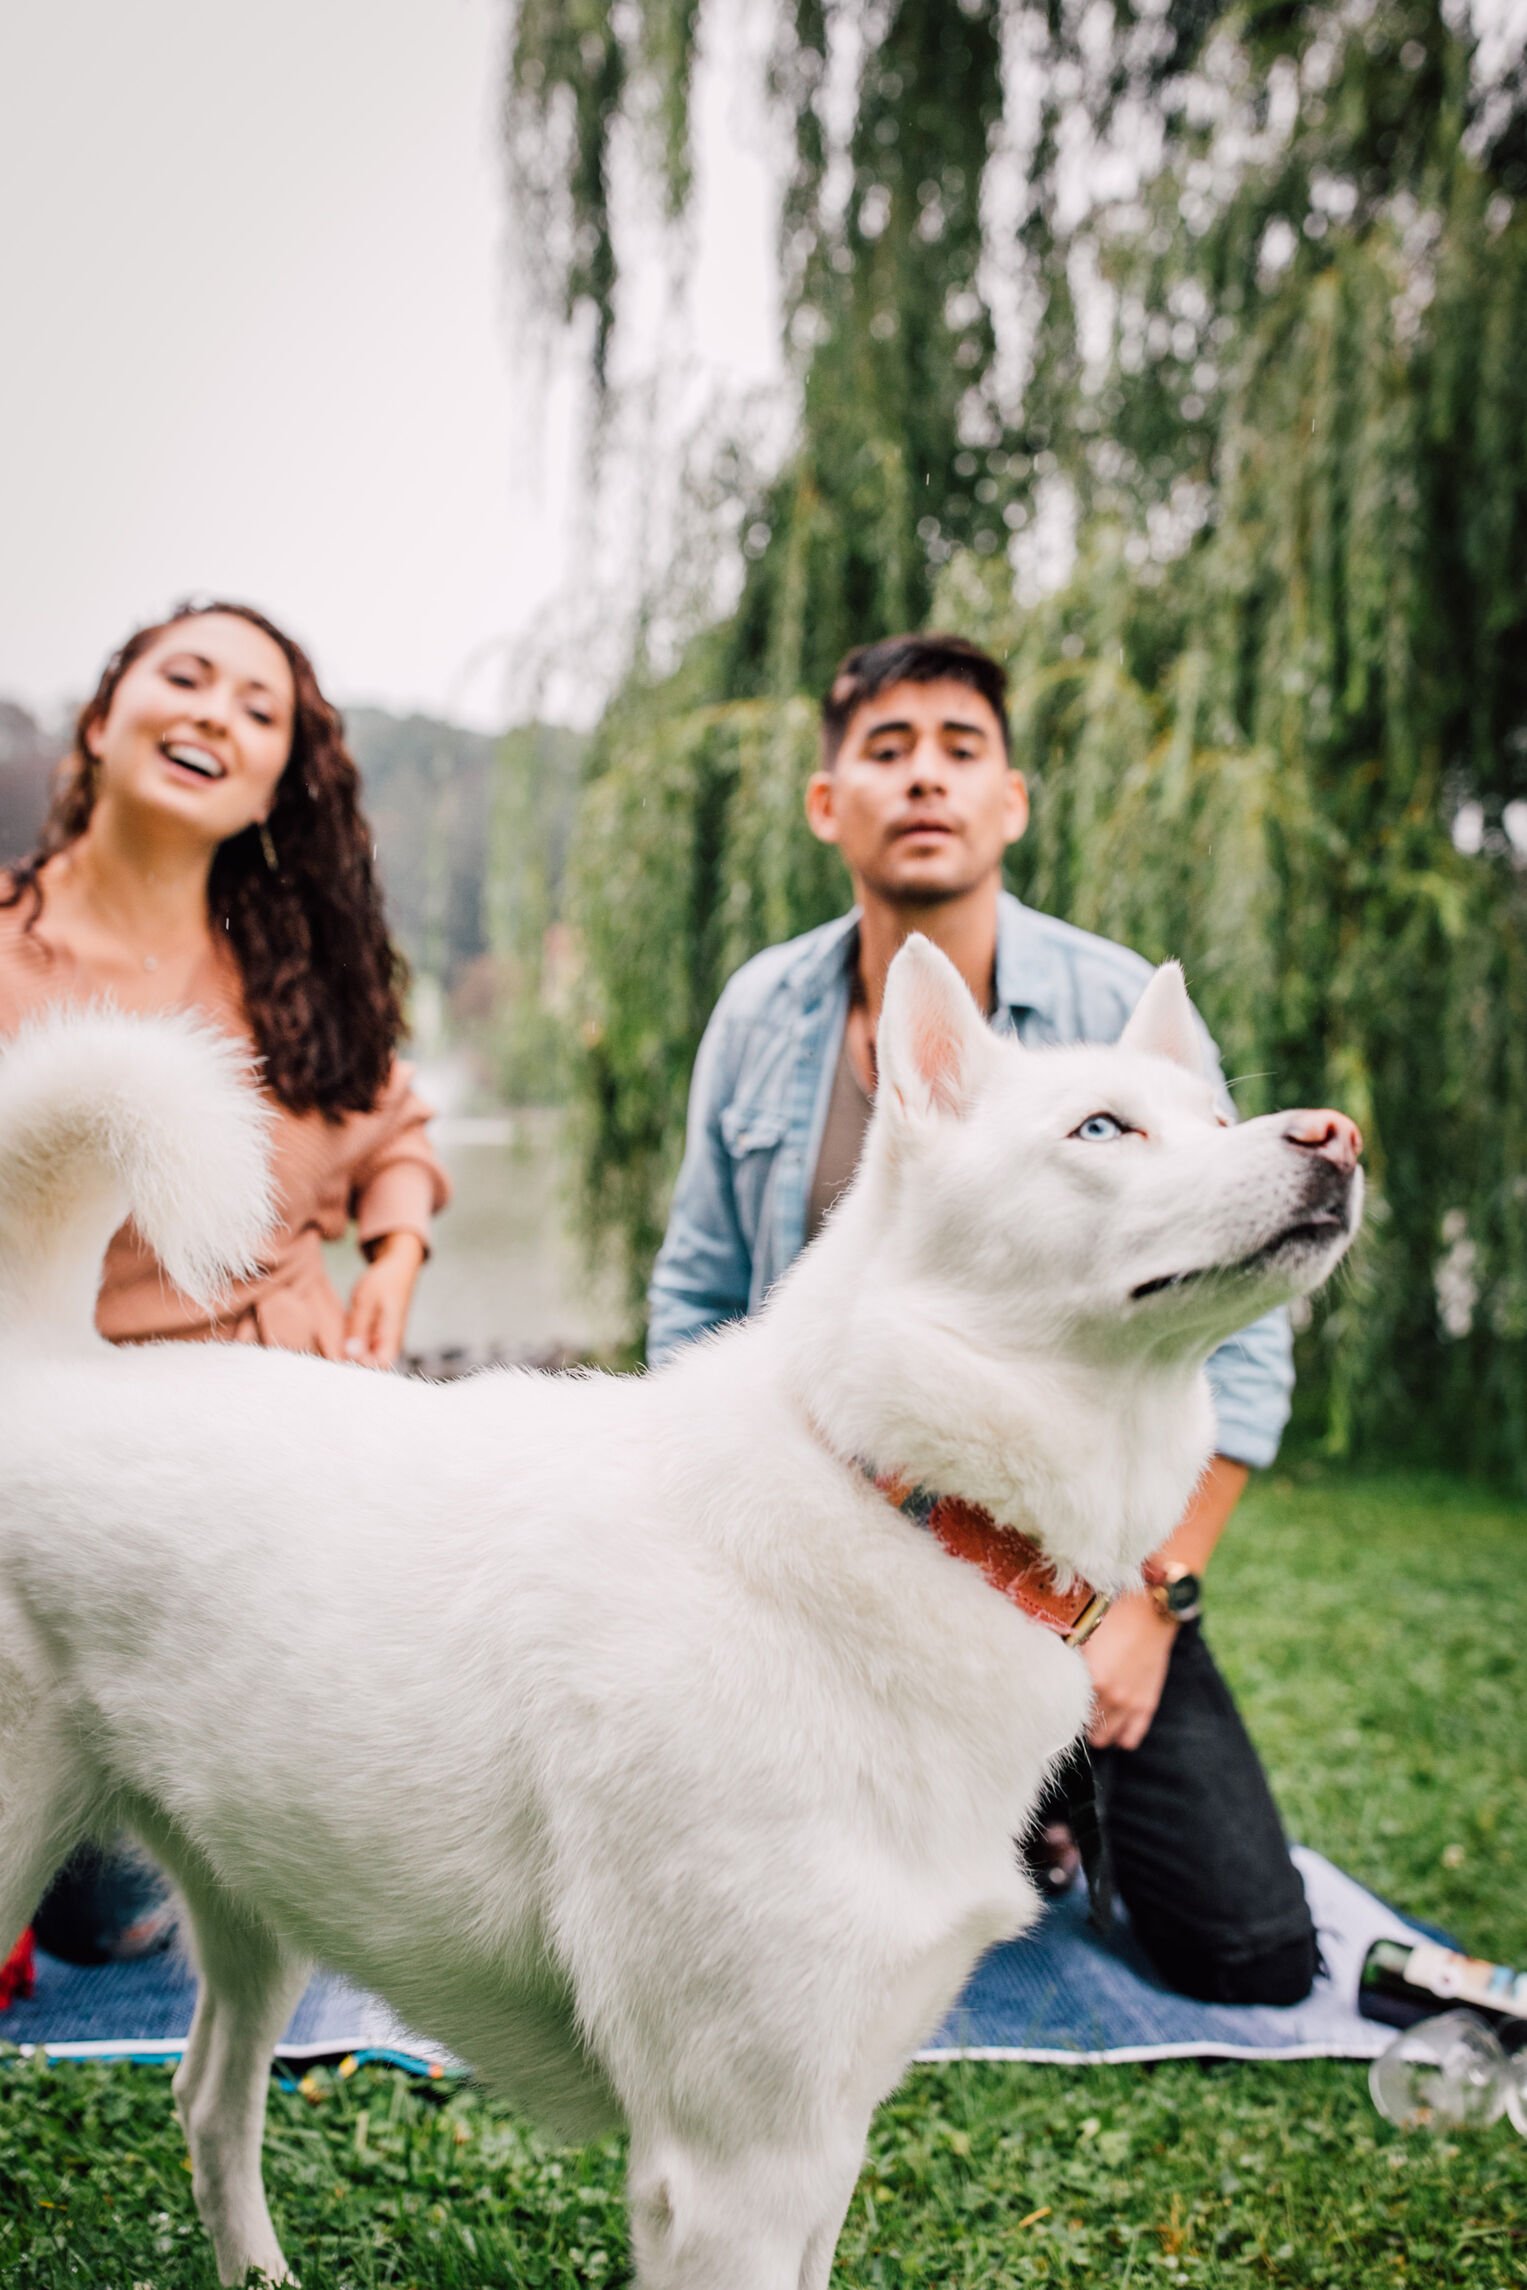  pablo and jessica laugh in the background as their dog looks up and off camera during their dog engagement photos session 